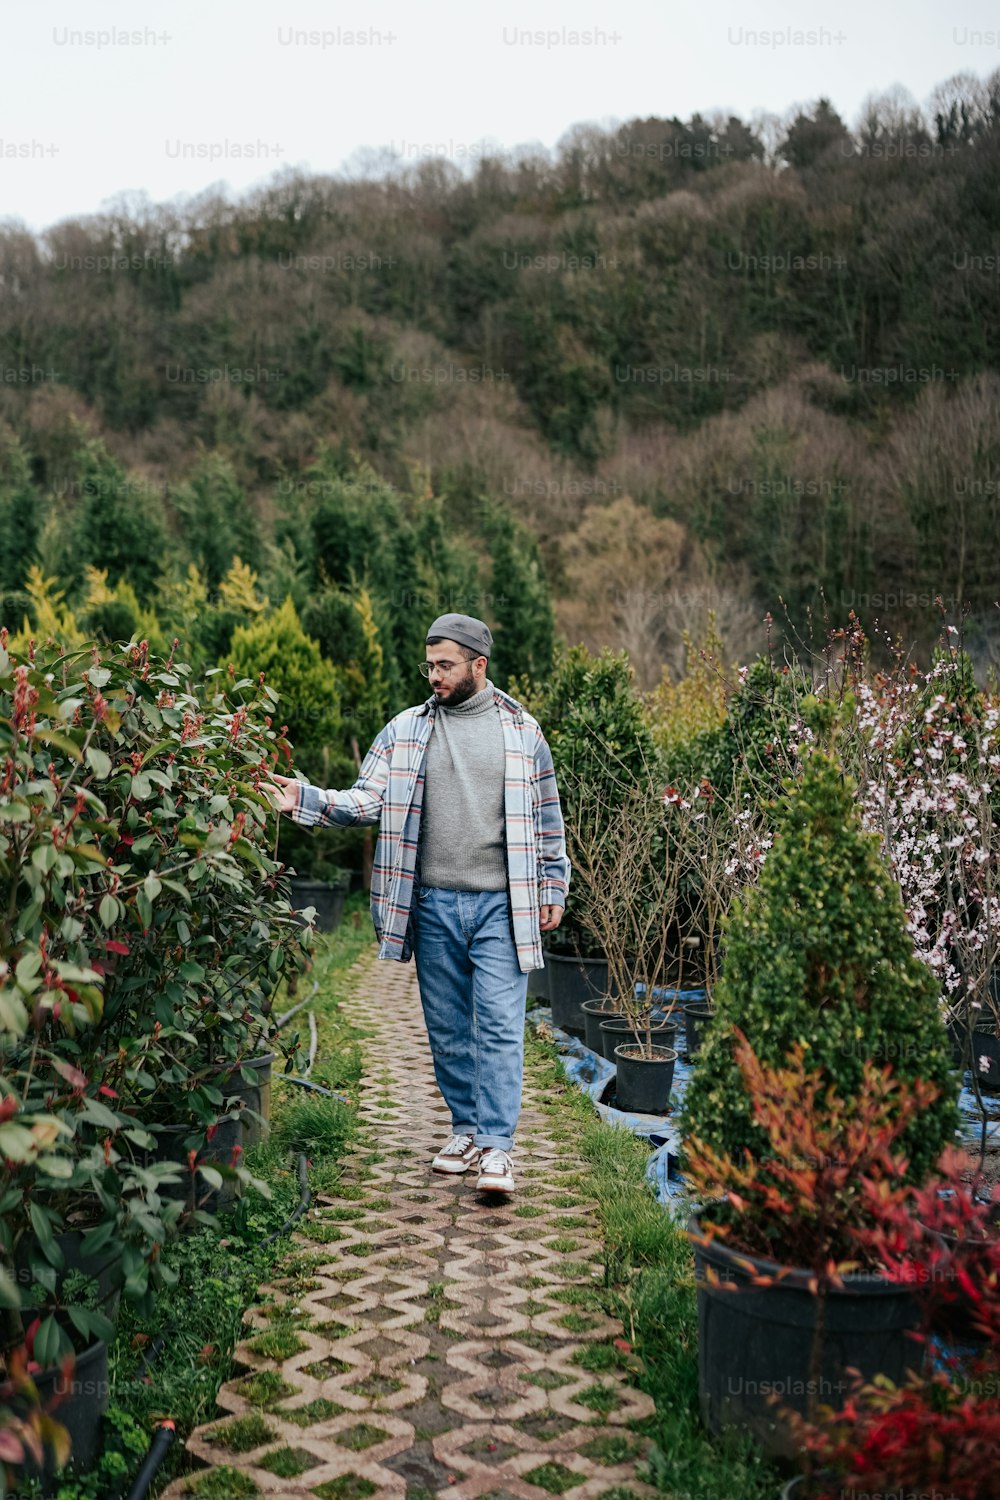 a man walking through a garden filled with lots of plants